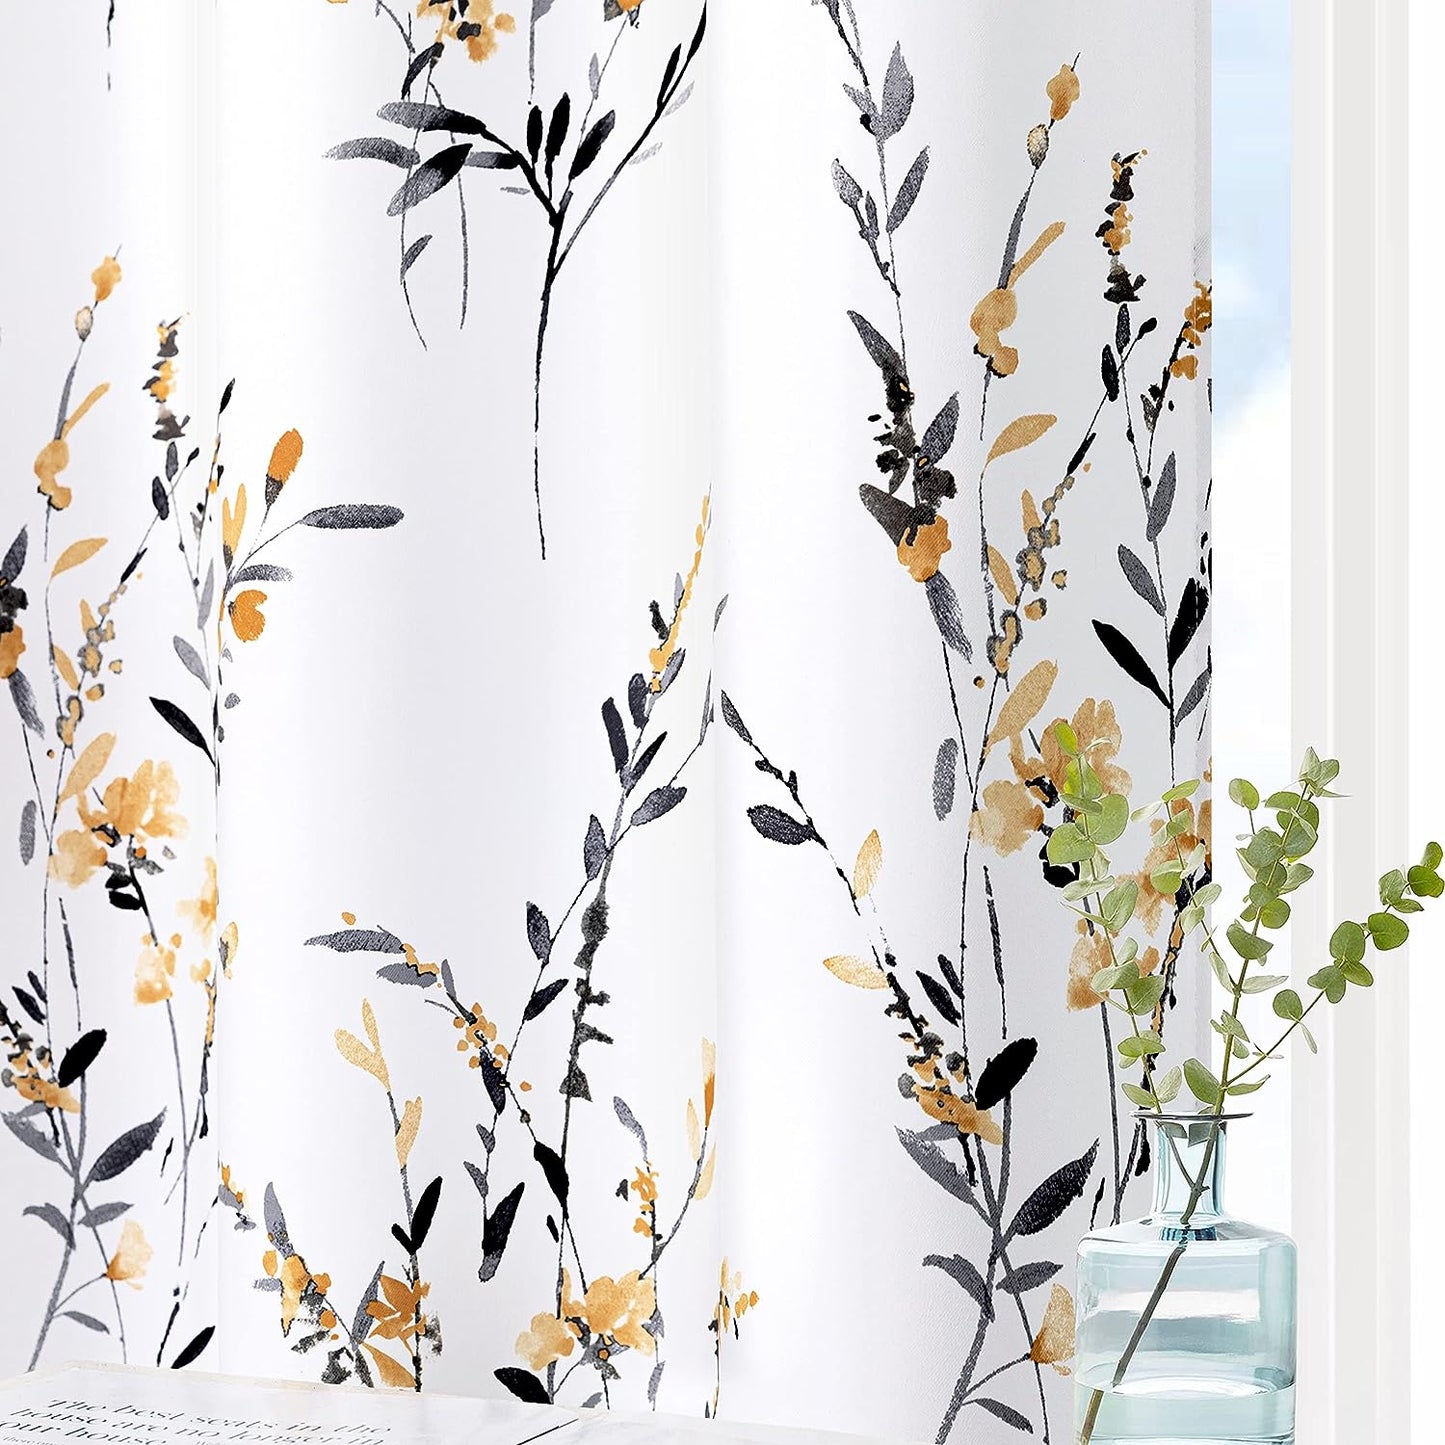 MYSKY HOME Living Room Curtains 84 Inches Long Floral Curtains Light Filtering Thermal Insulated Soft for Dining Room Farmhouse Leaf Grommet Curtains Home Decoration, Set of 2 Panels, Navy Blue  MYSKYTEX Yellow 52"W X 108"L 